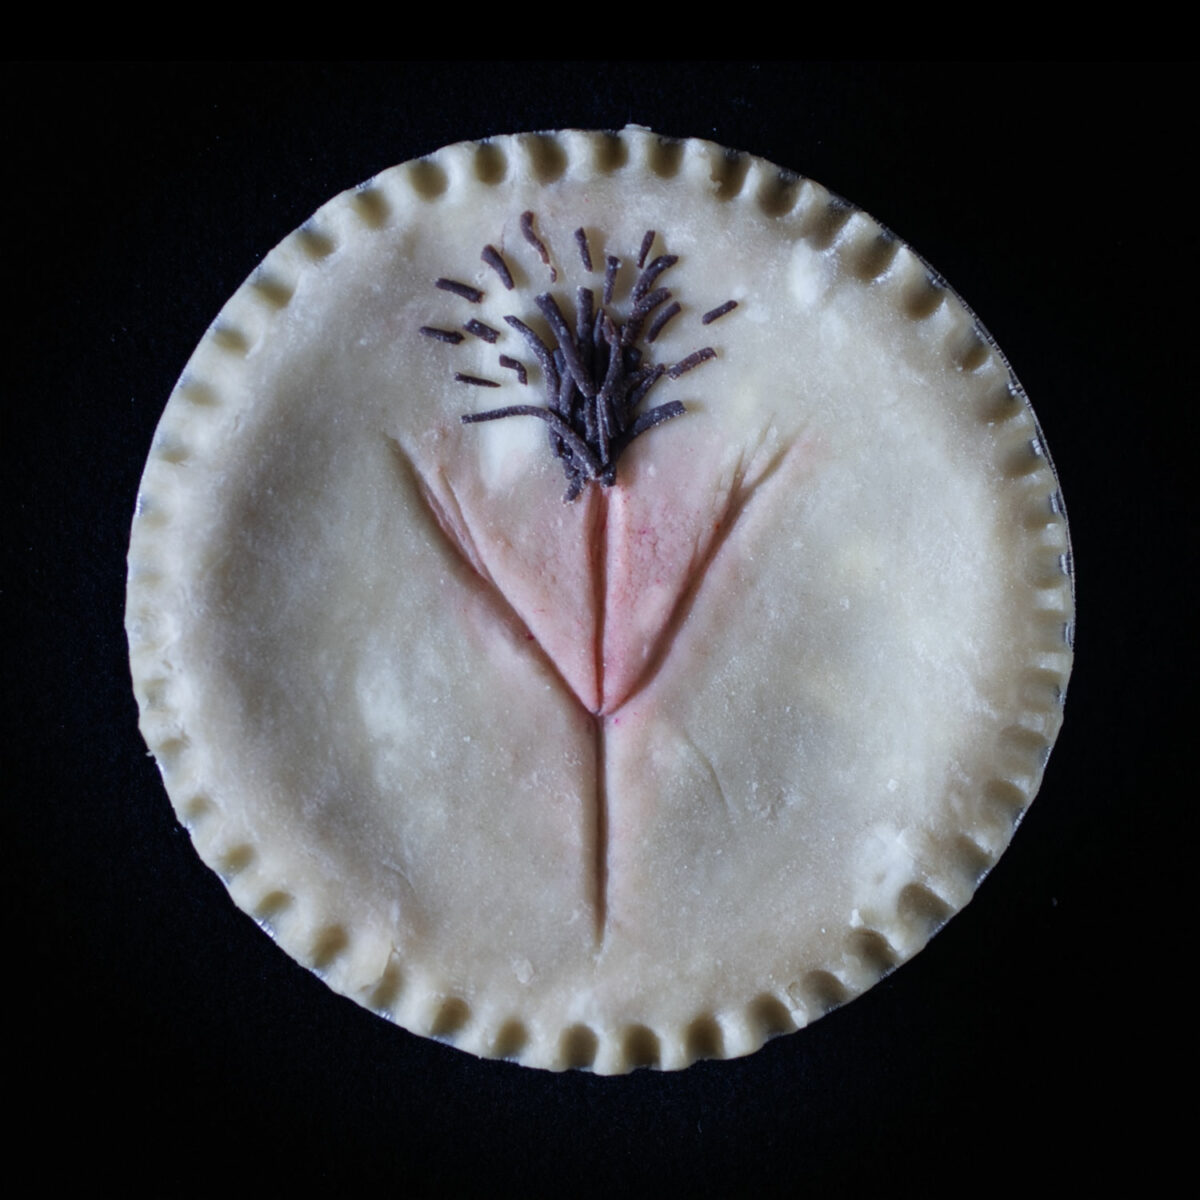 A made from scratch pie with hand sculpted vulva art on a black background